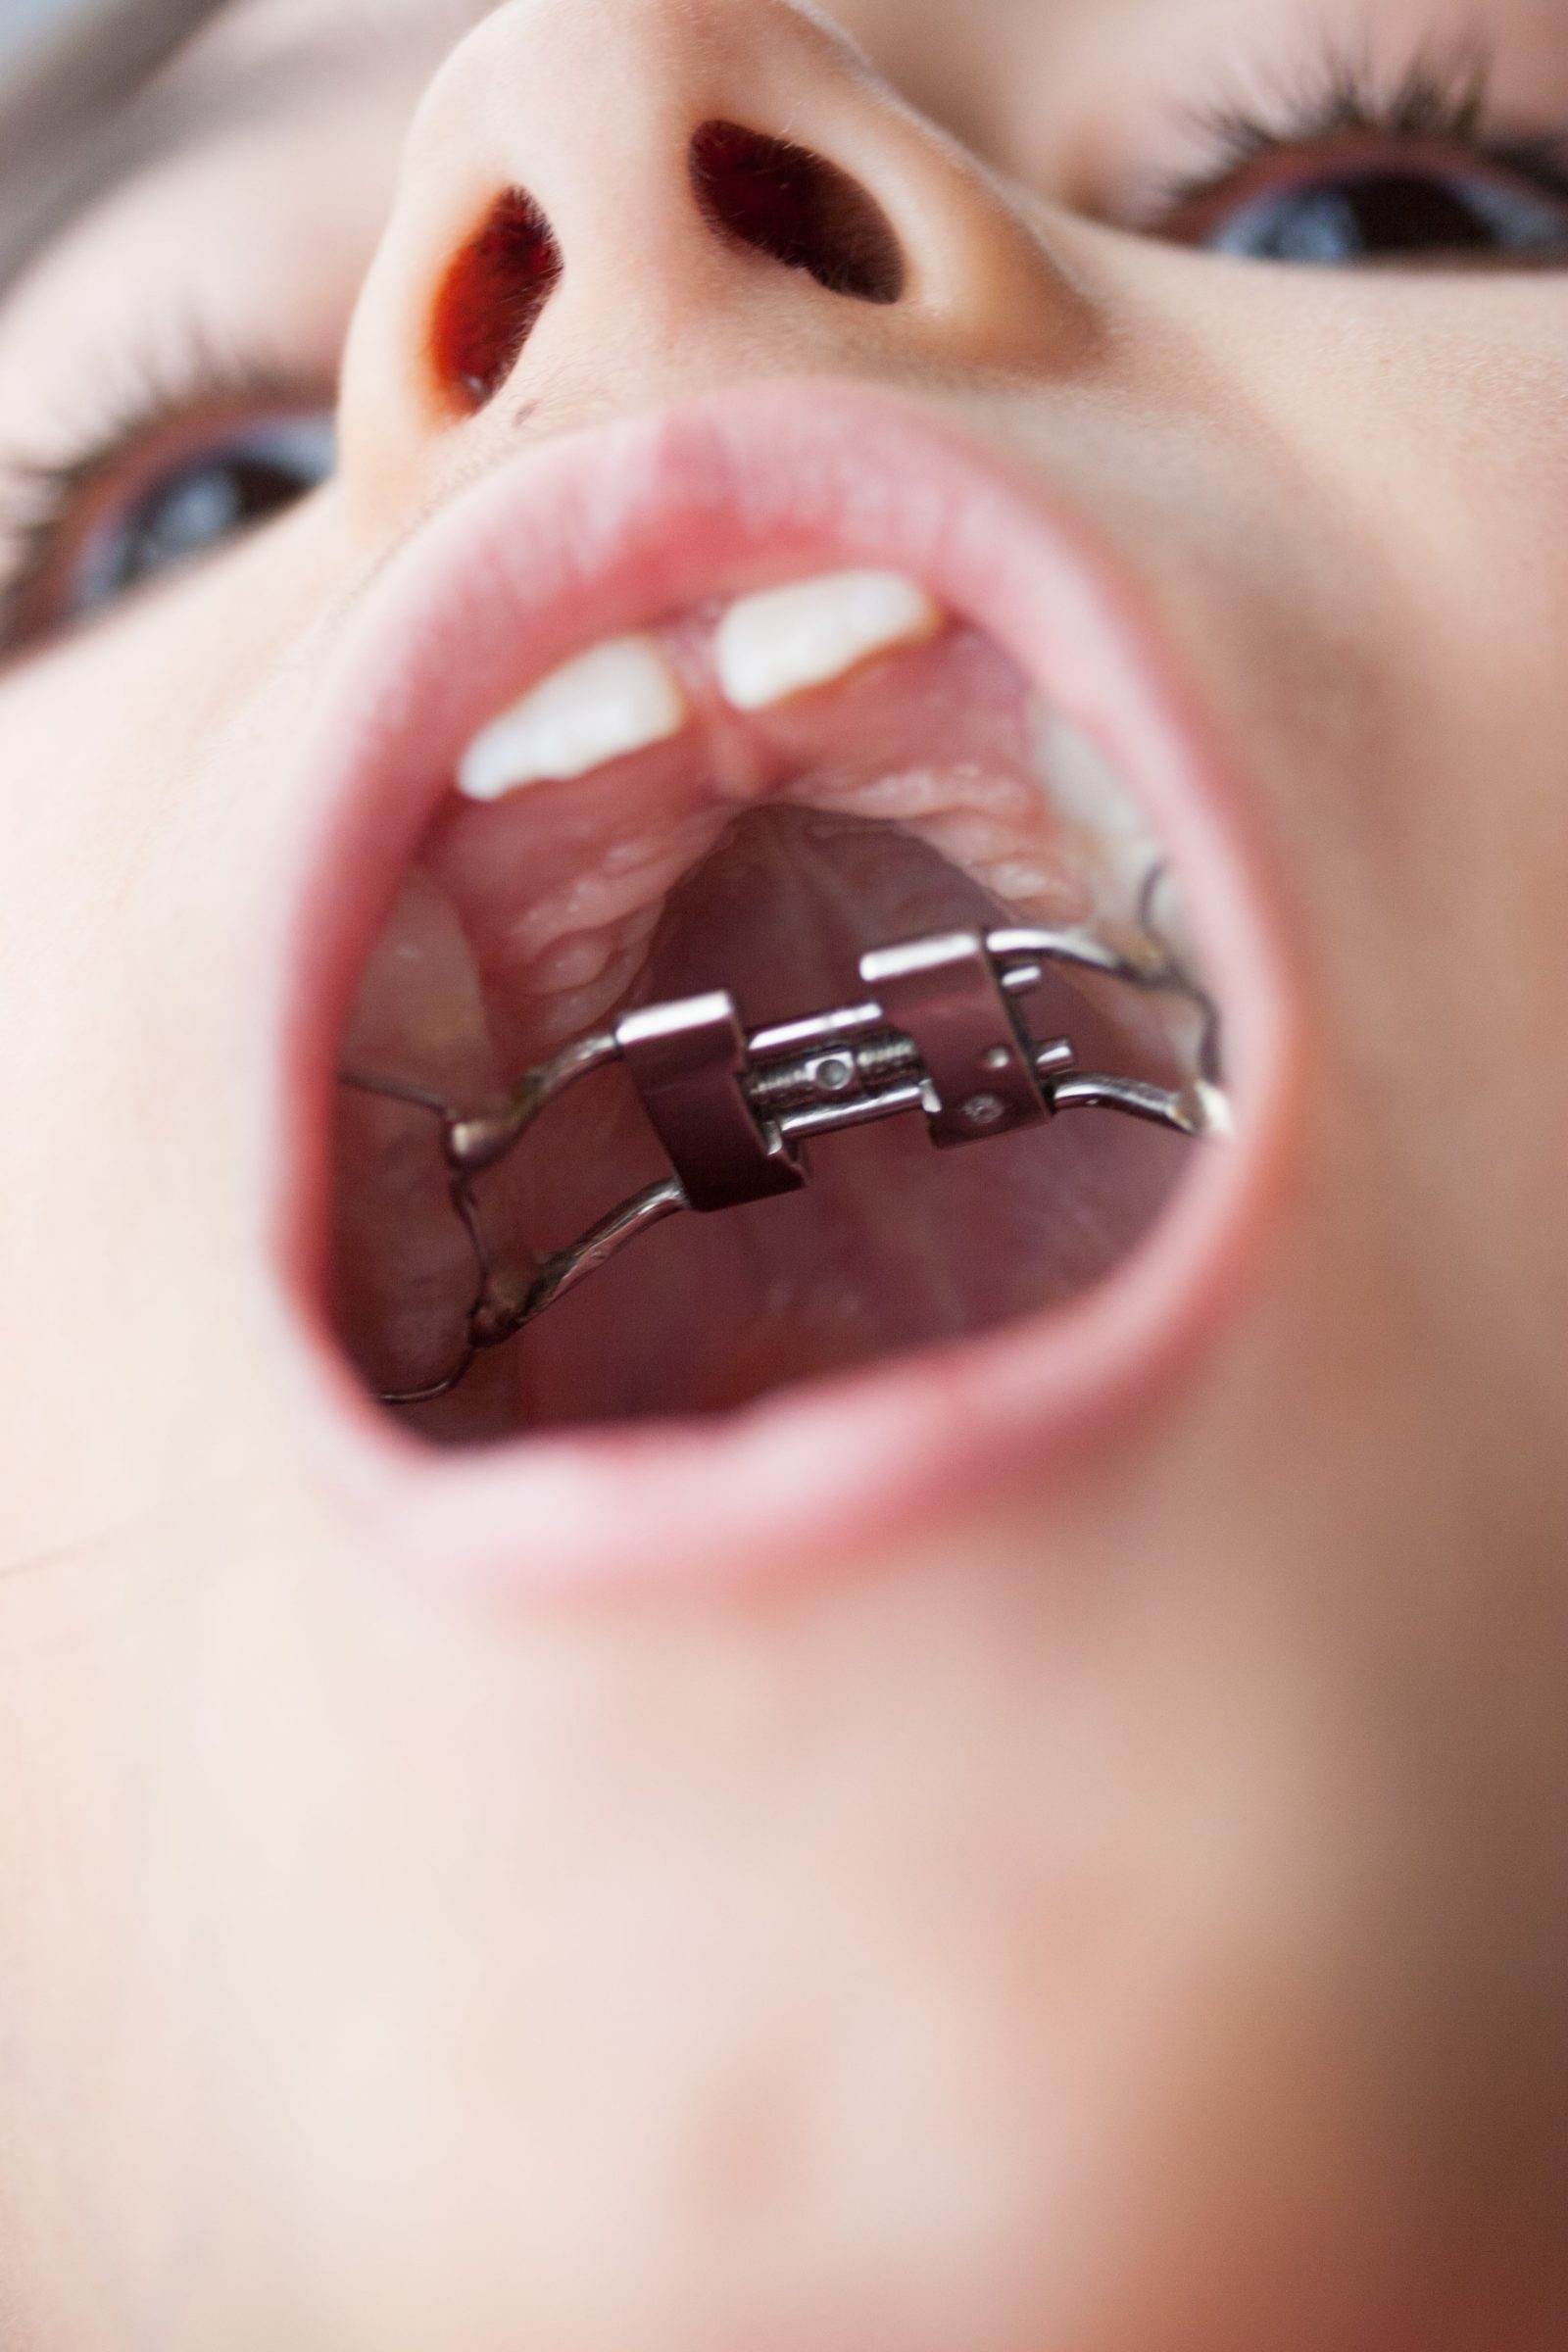 child opening their mouth to show a palate expander orthodontic appliance